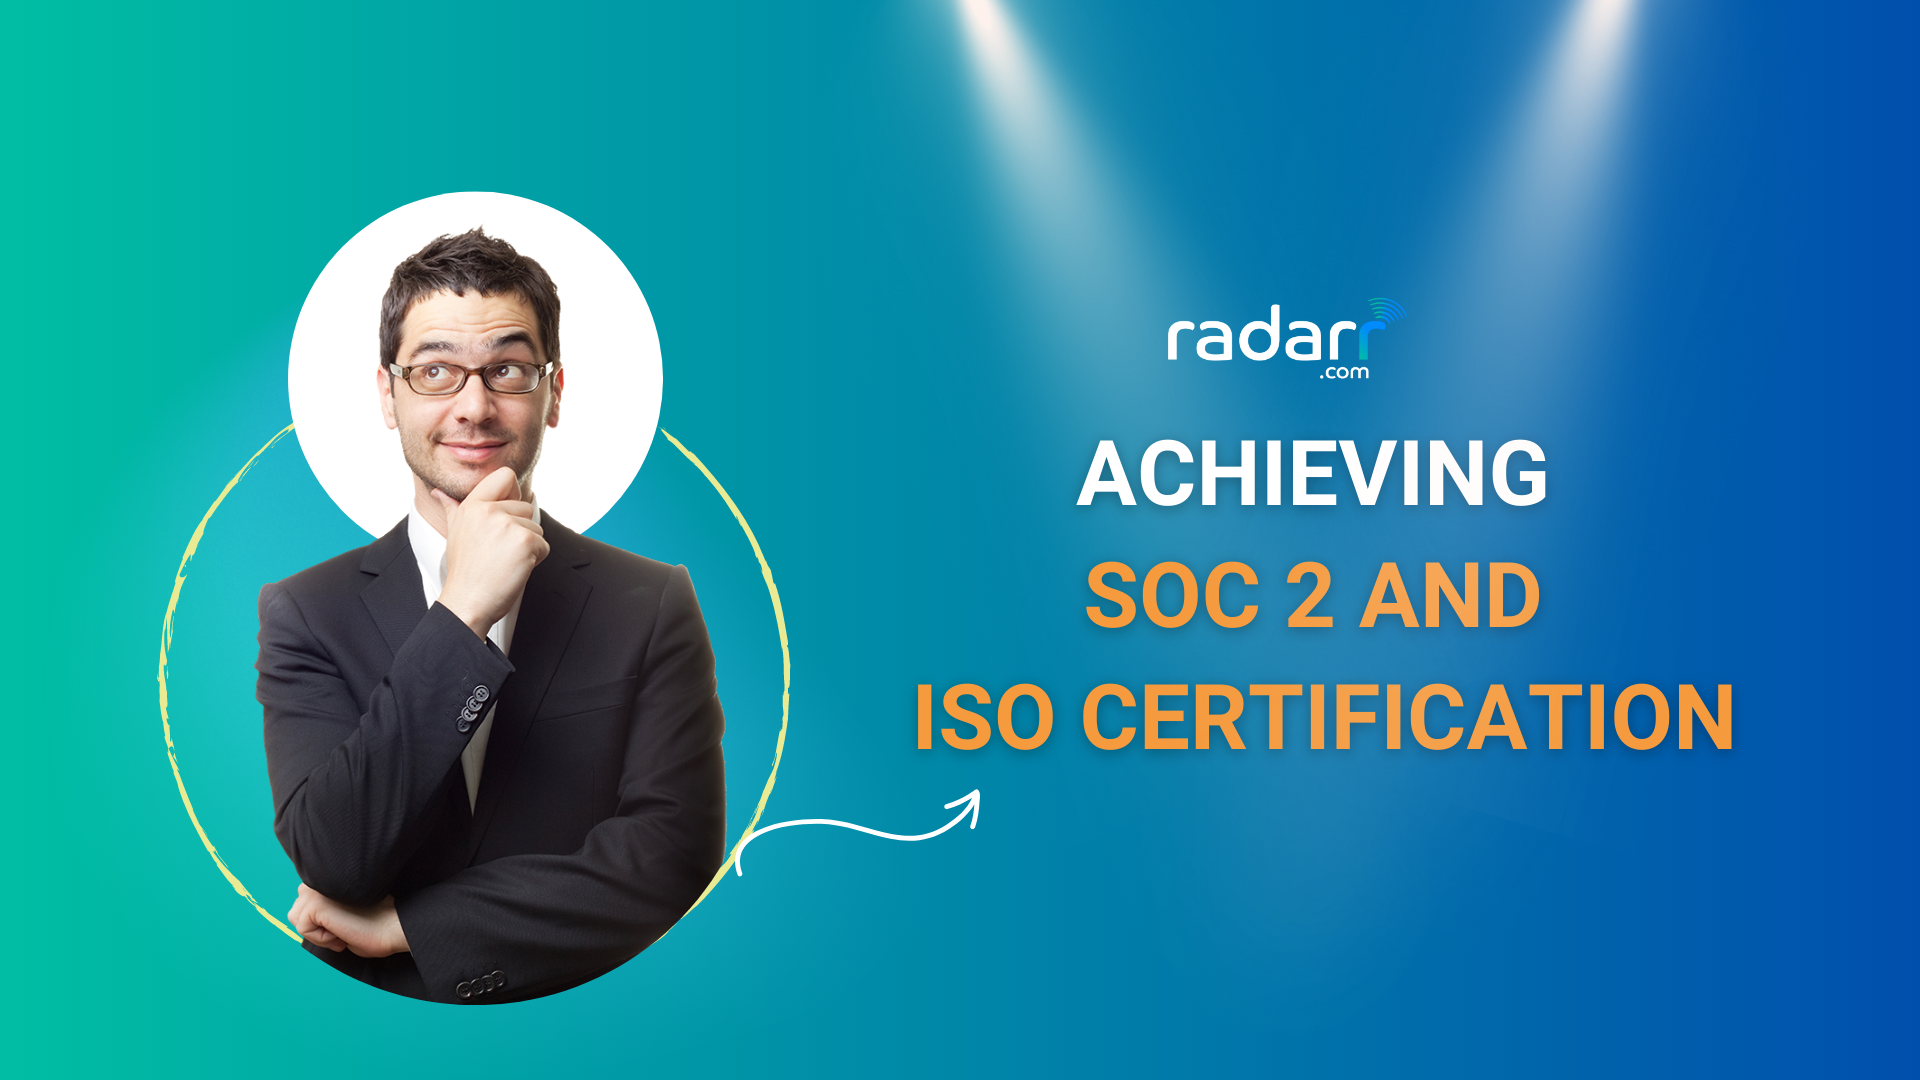 Achieving SOC 2 and ISO Certification: A Major Milestone for Radarr Technologies